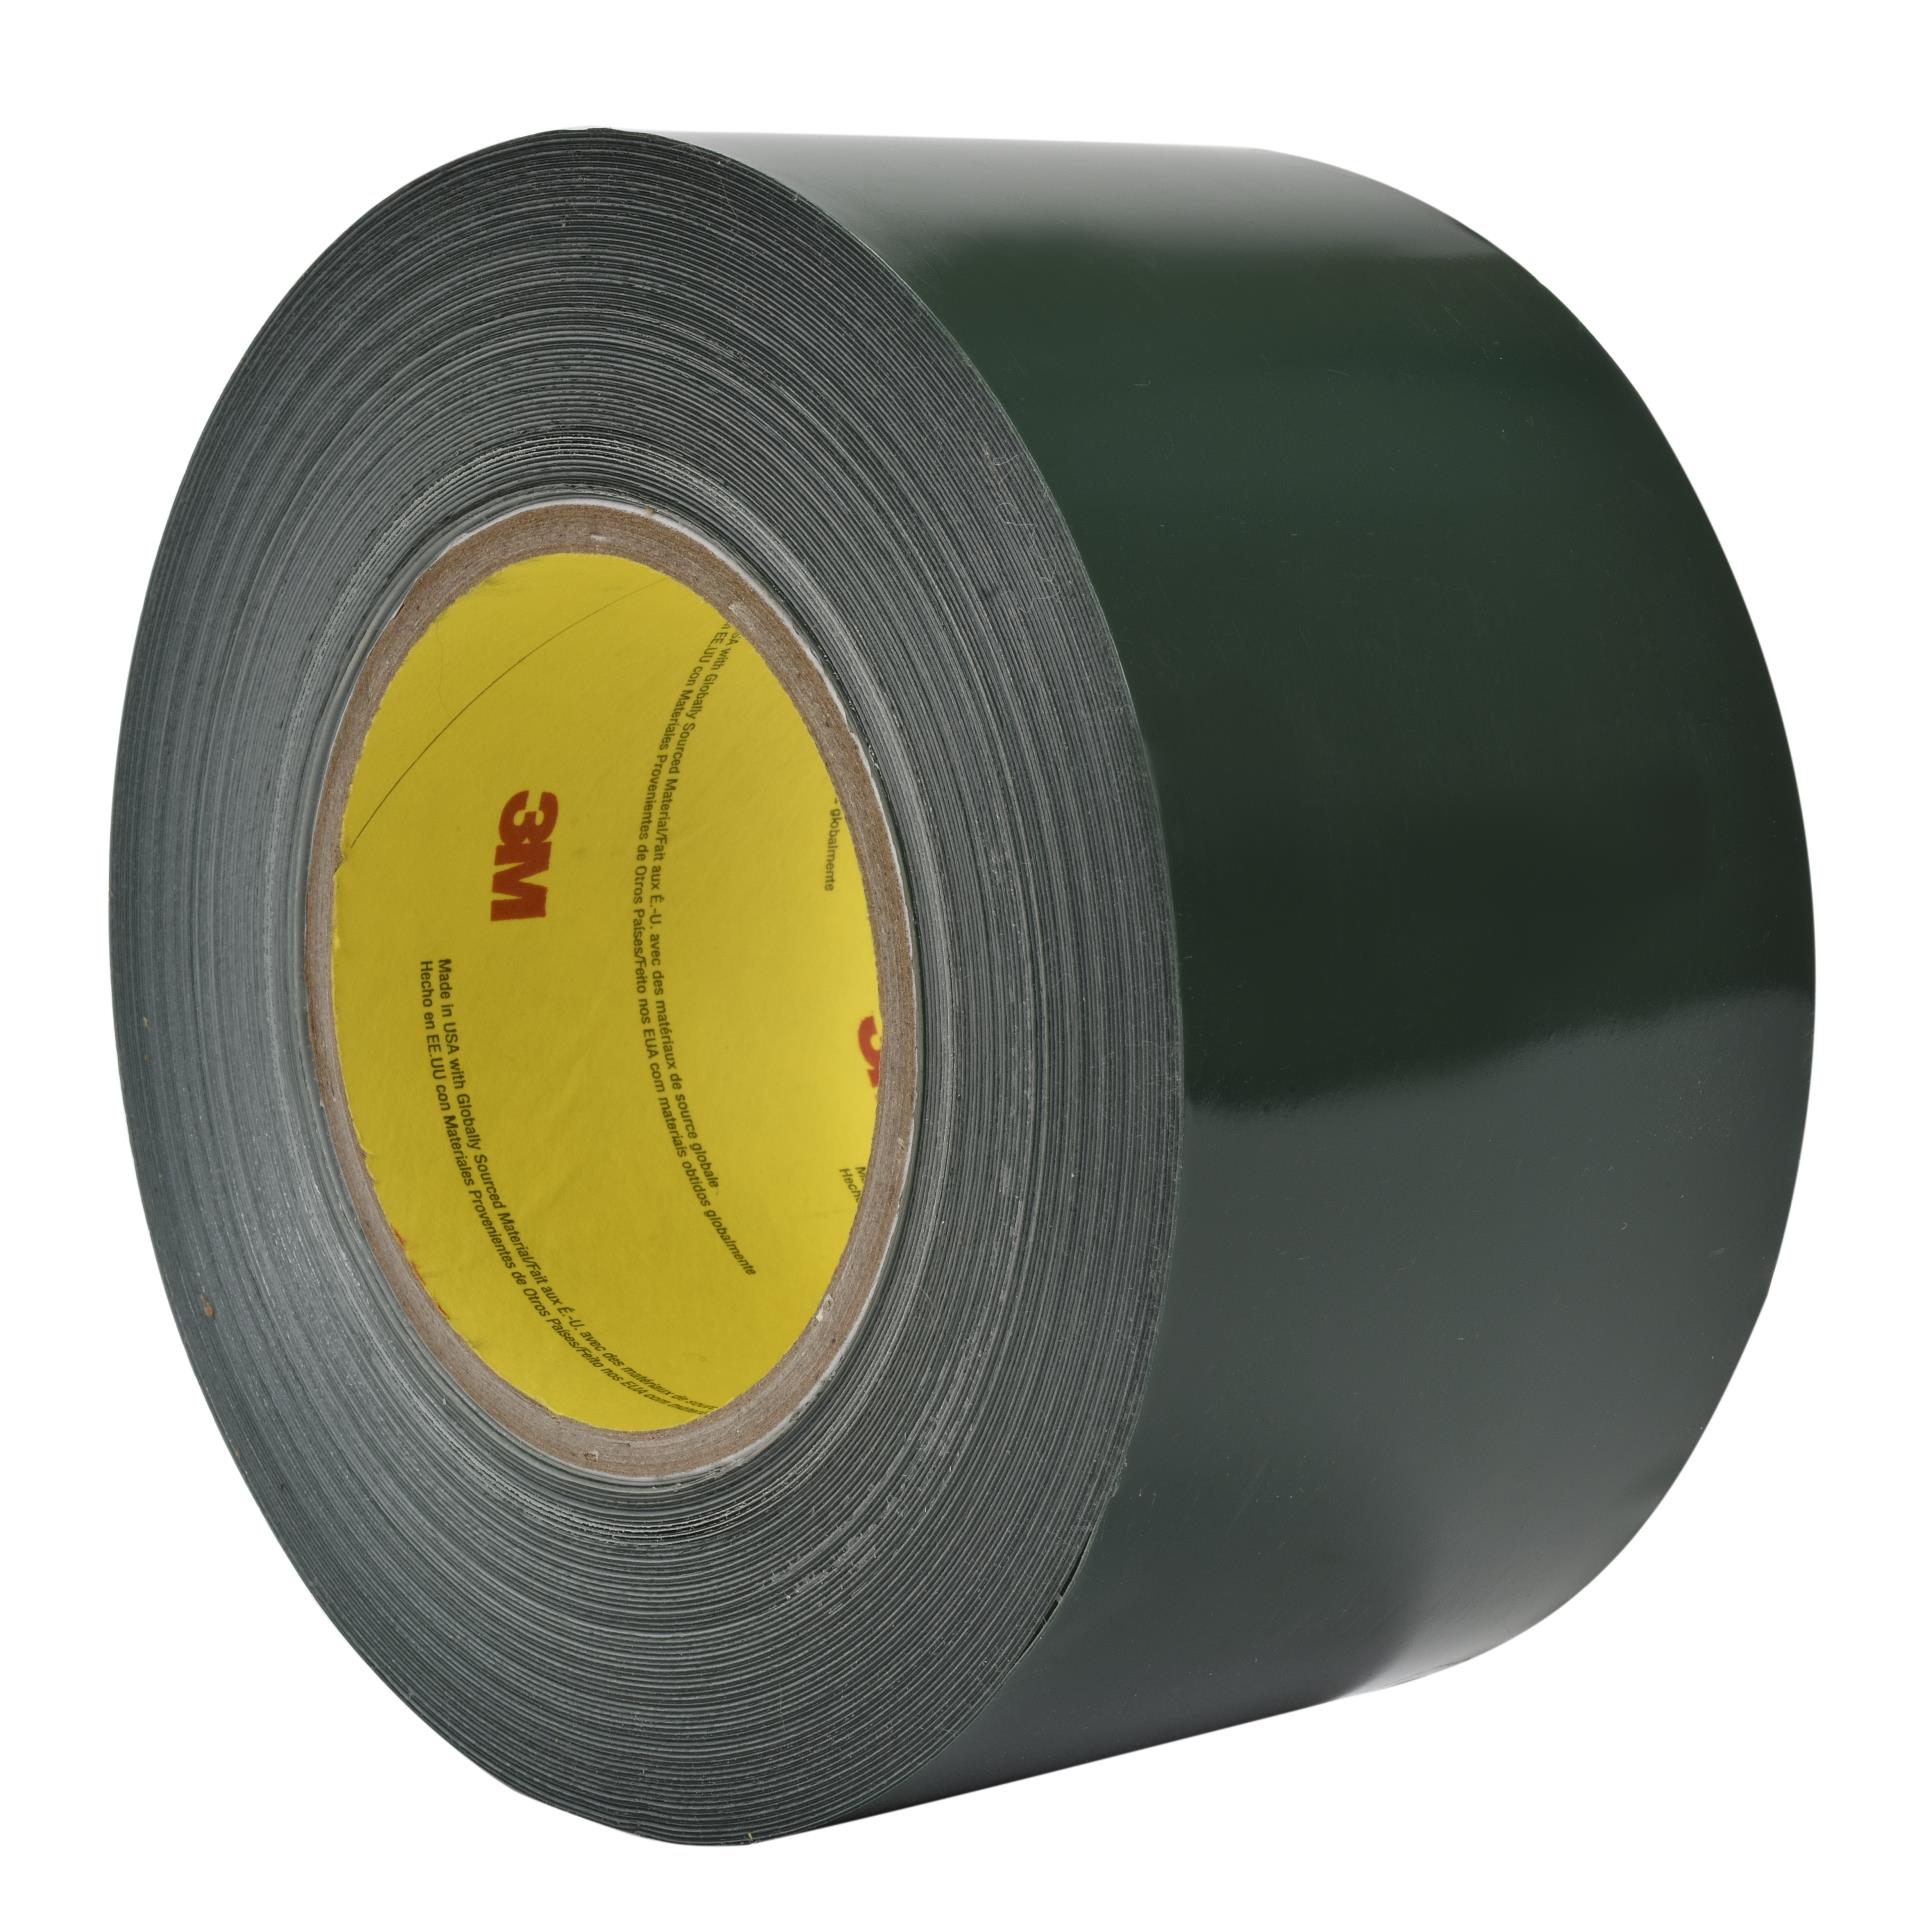 00076308987510 3M™ Sealing and Holding Tape 8069, in x 25 yd, 36 rolls  per case, Solid Liner Aircraft products sealing-tapes 9372957